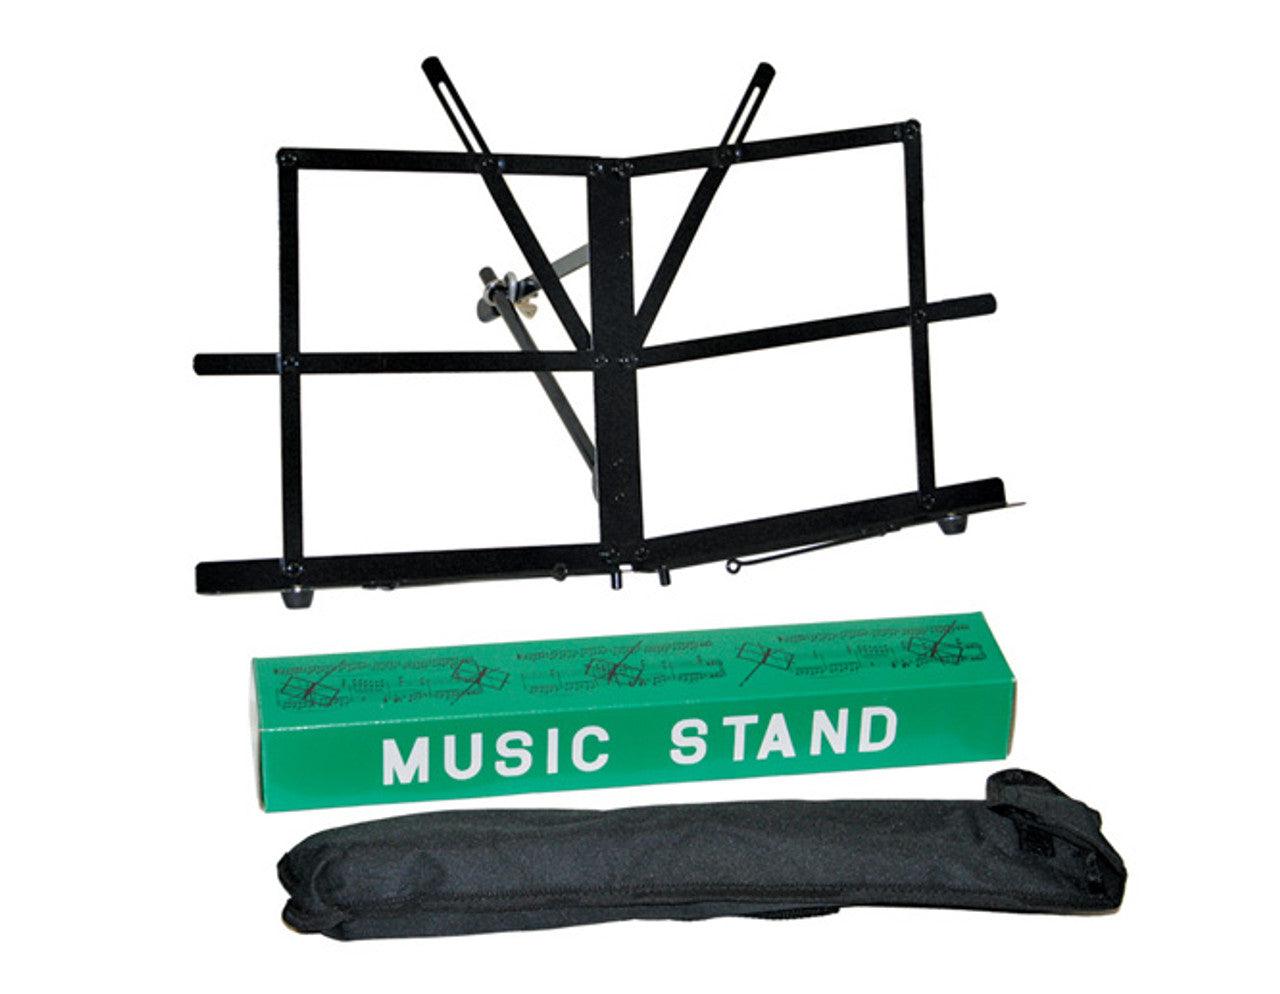 Music Stand Desk Type 29H X 47W Cm Black - Accessories - Stands by CPK at Muso's Stuff